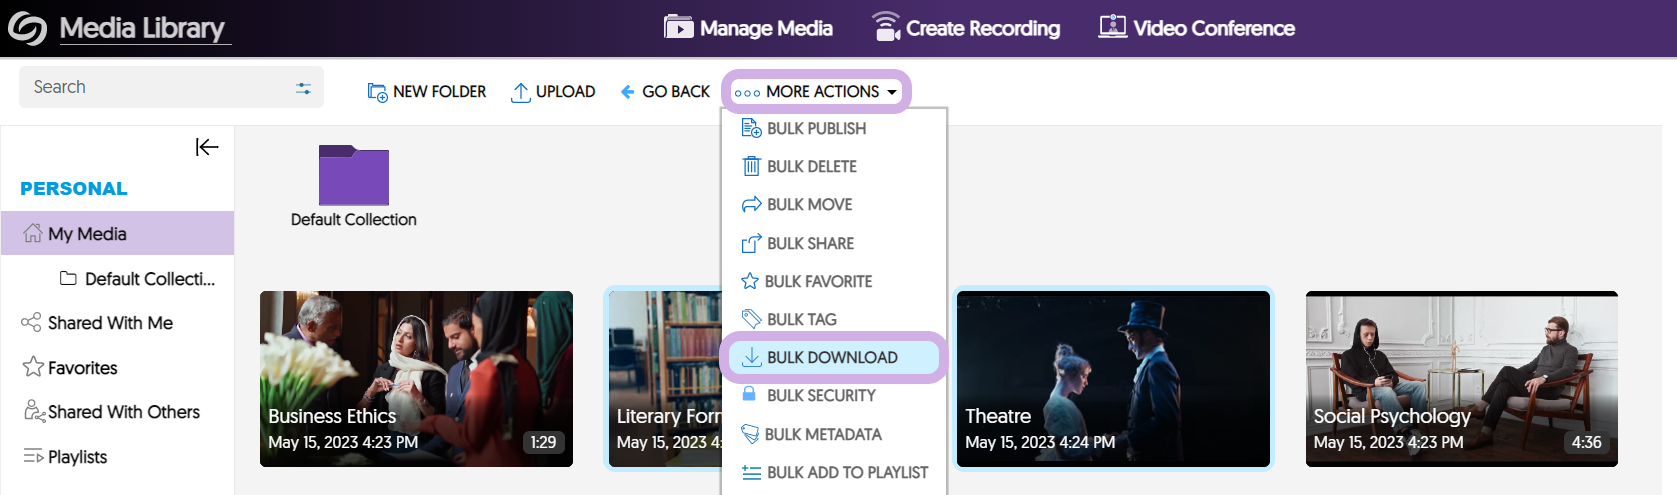 The video platform with the More Actions menu selected and Bulk Download highlighted.